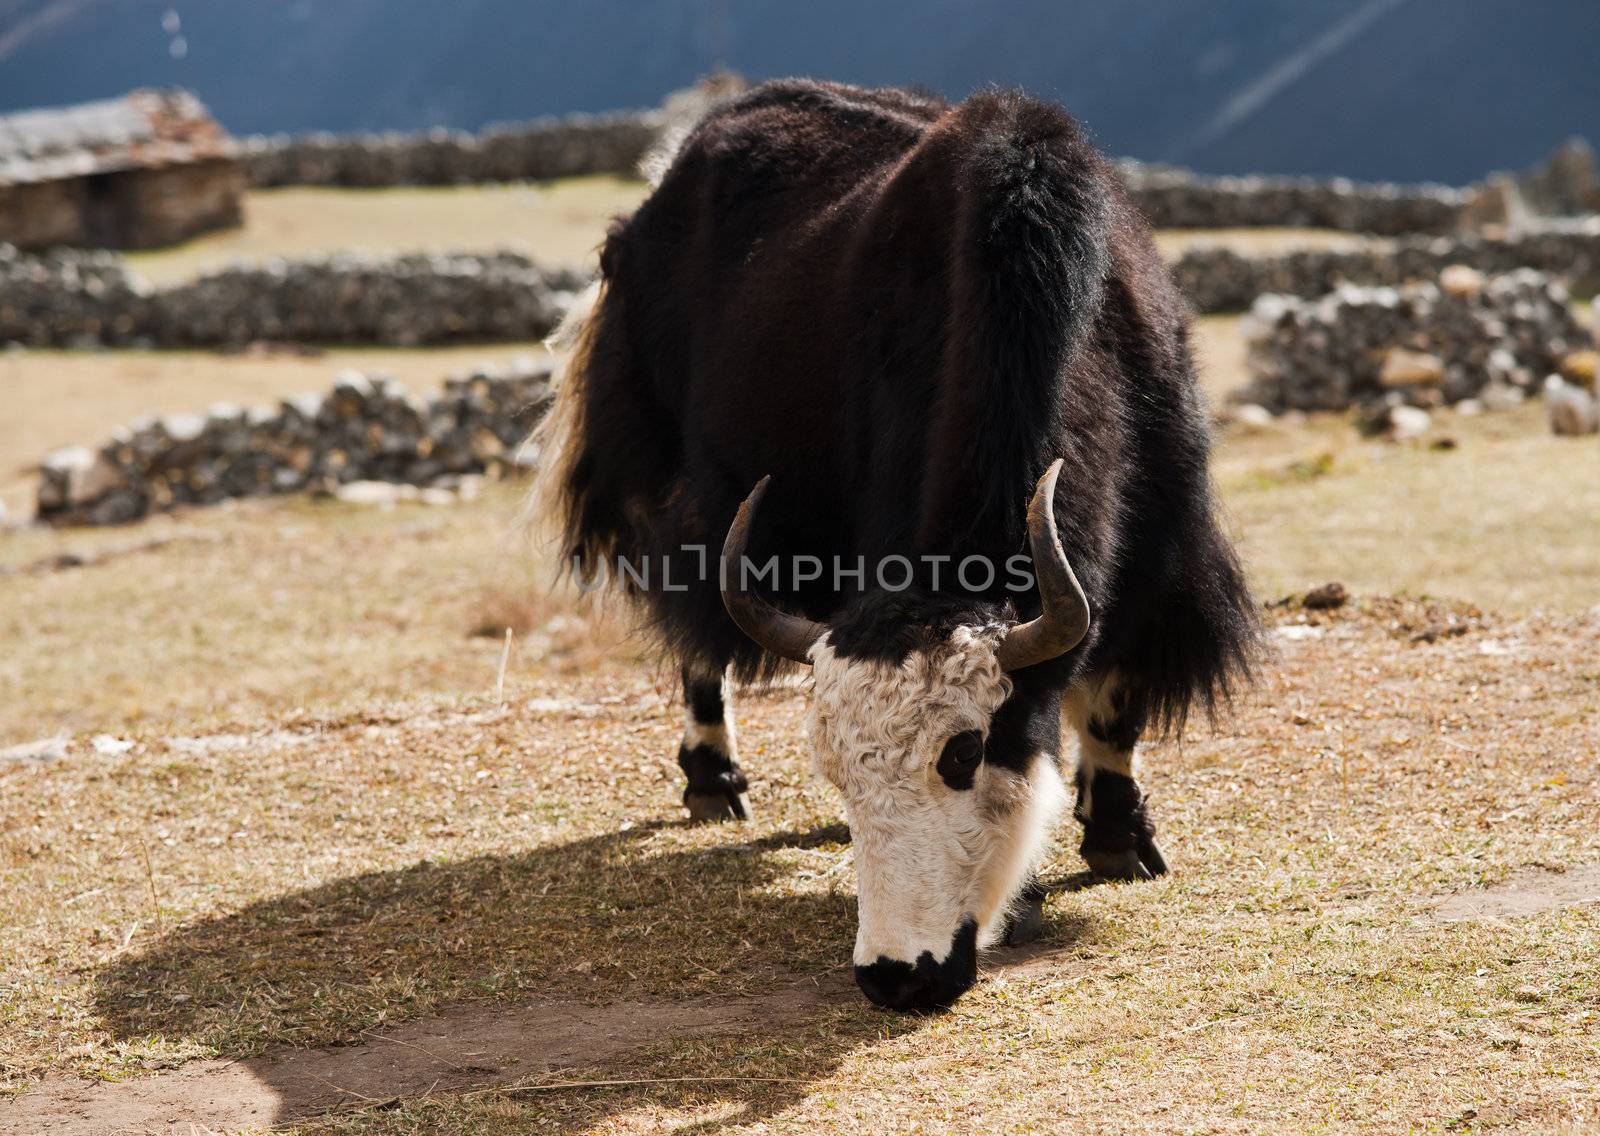 rural life in Nepal: Yak and highland village in Himalayas